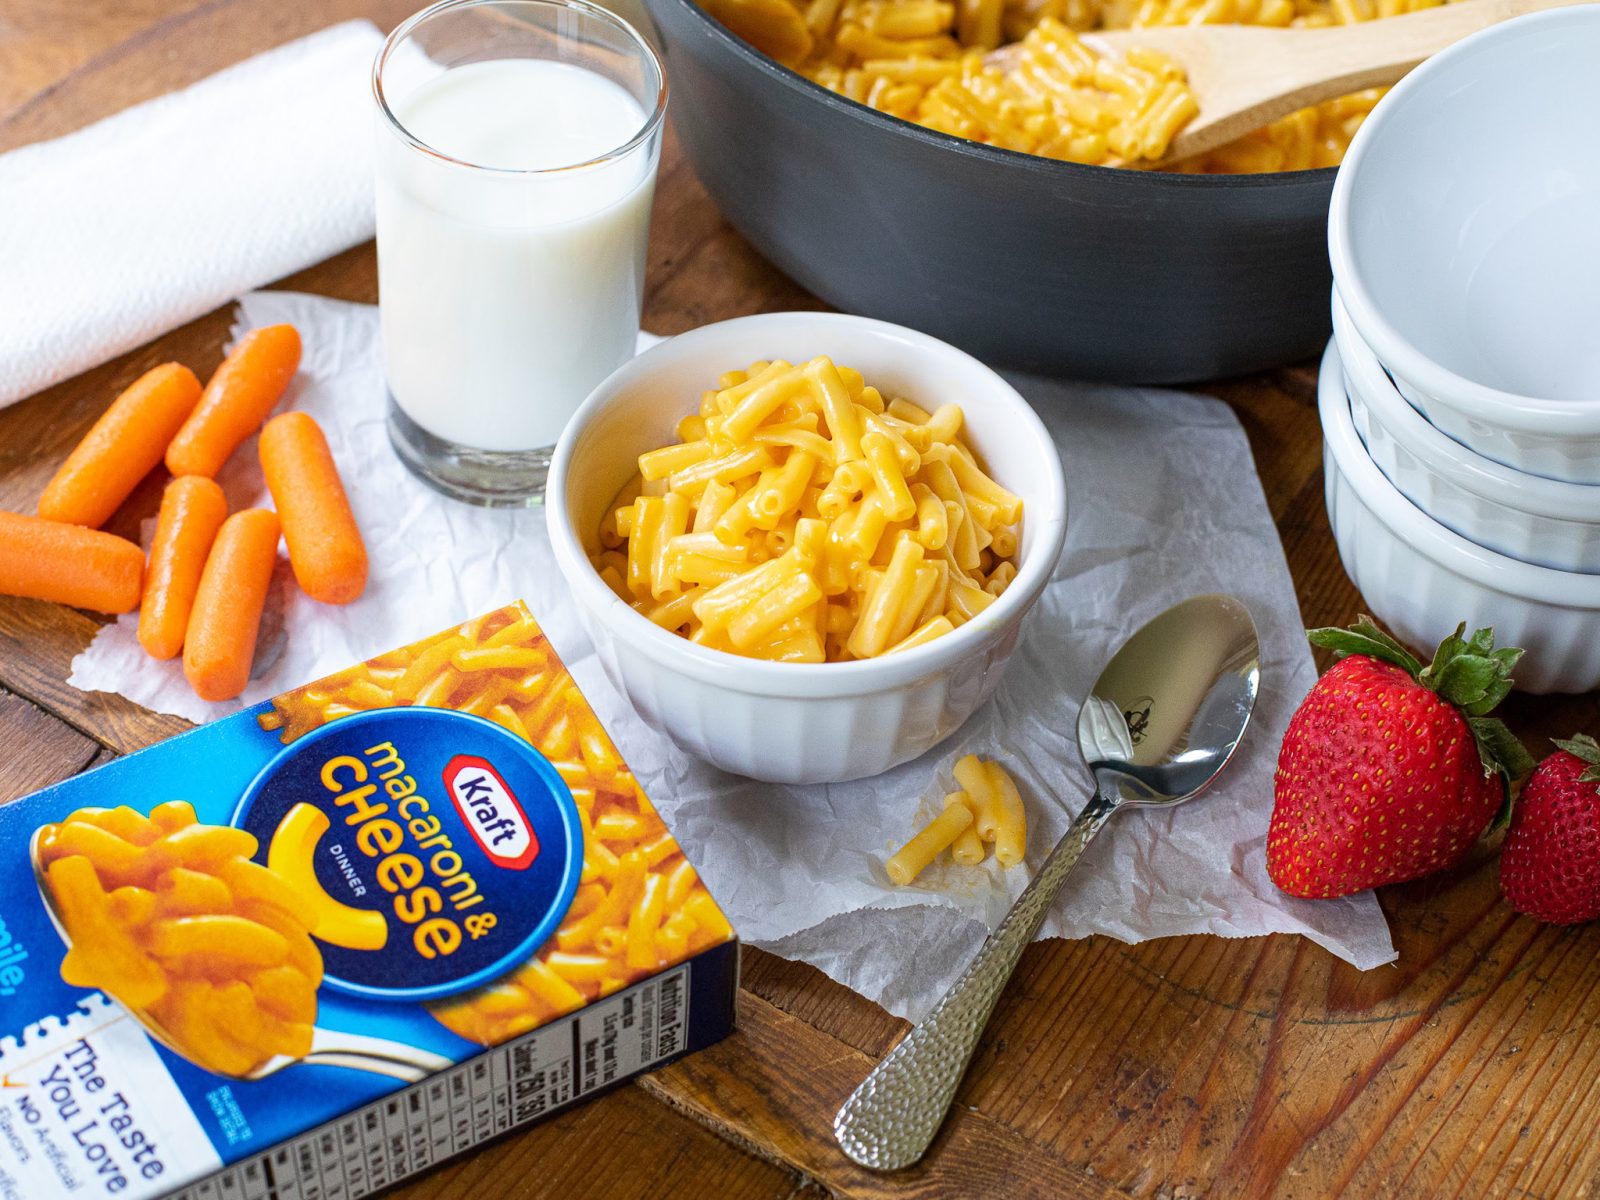 Kraft Macaroni And Cheese As Low As 90¢ At Kroger